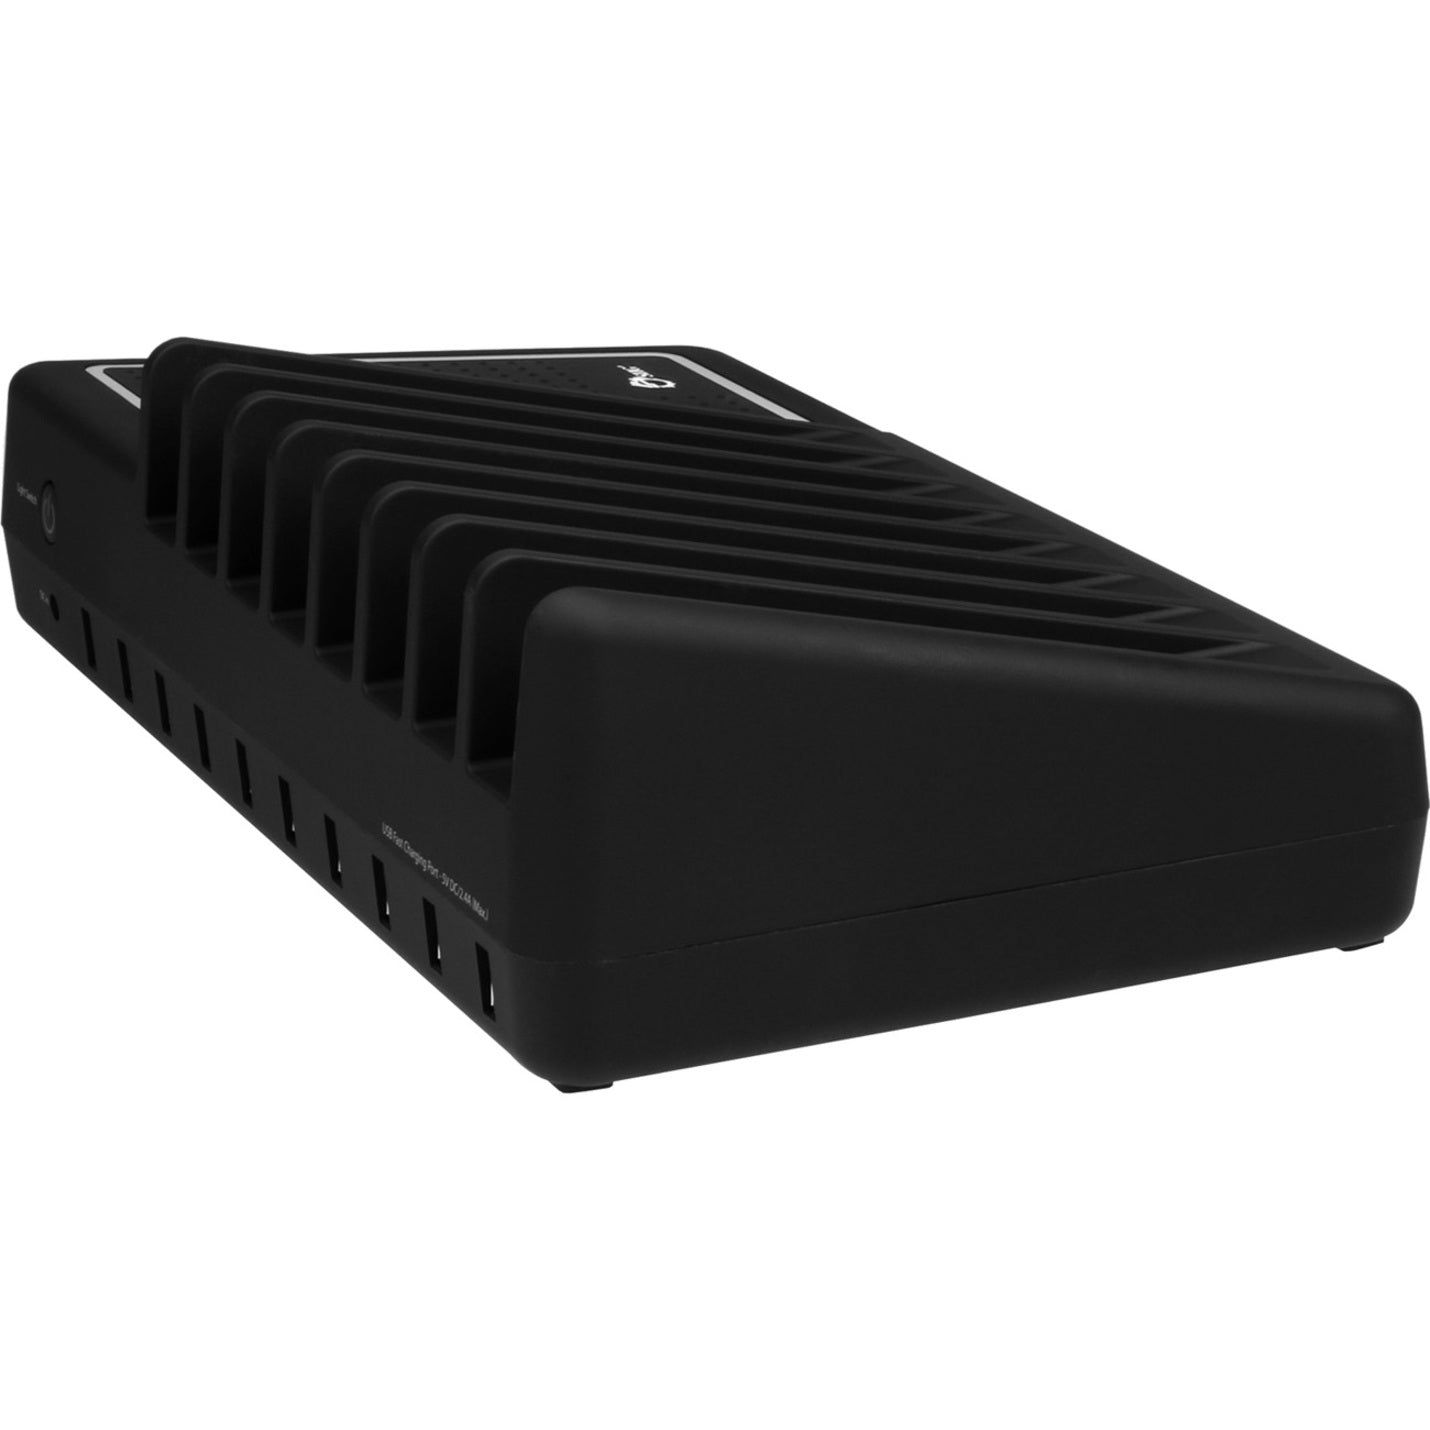 SIIG AC-PW1314-S1 10-Port USB Charging Station with Ambient Light Deck, Charge and Organize 10 USB Devices Simultaneously